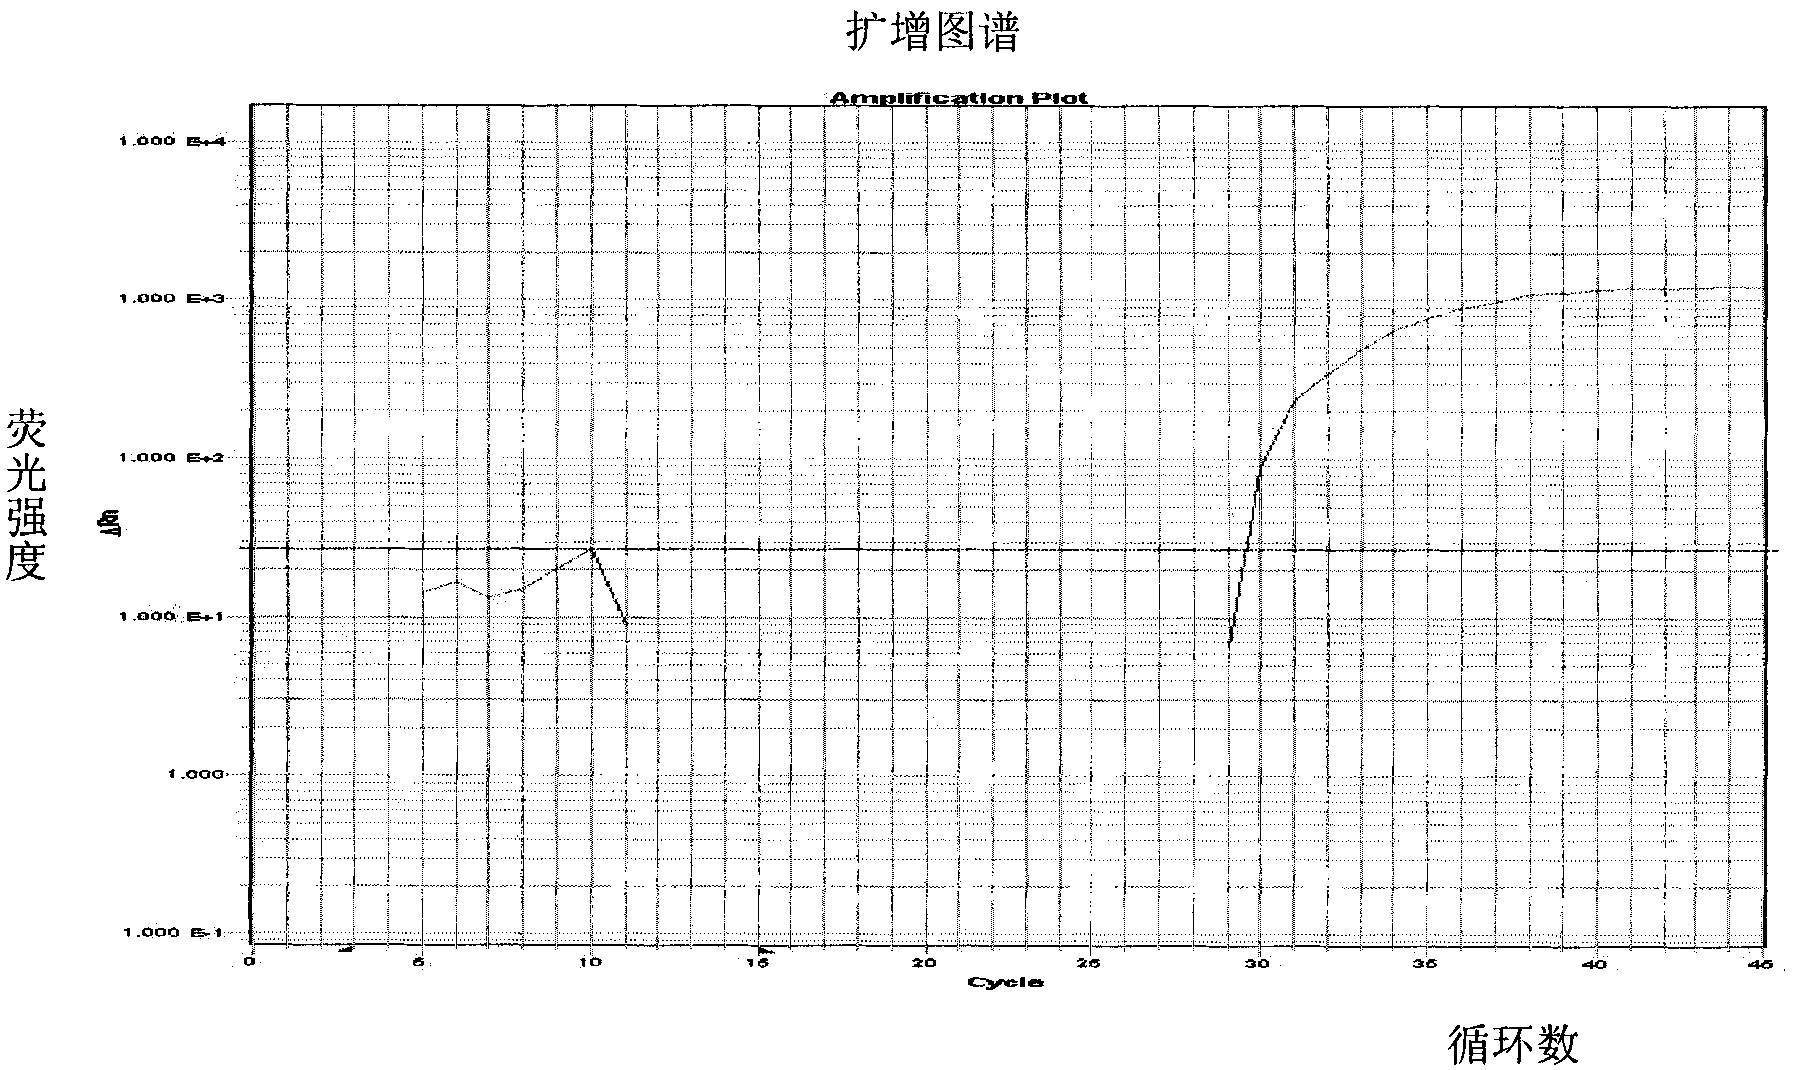 Preparation of kit and method for rapidly detecting carotene components in foods and beverages